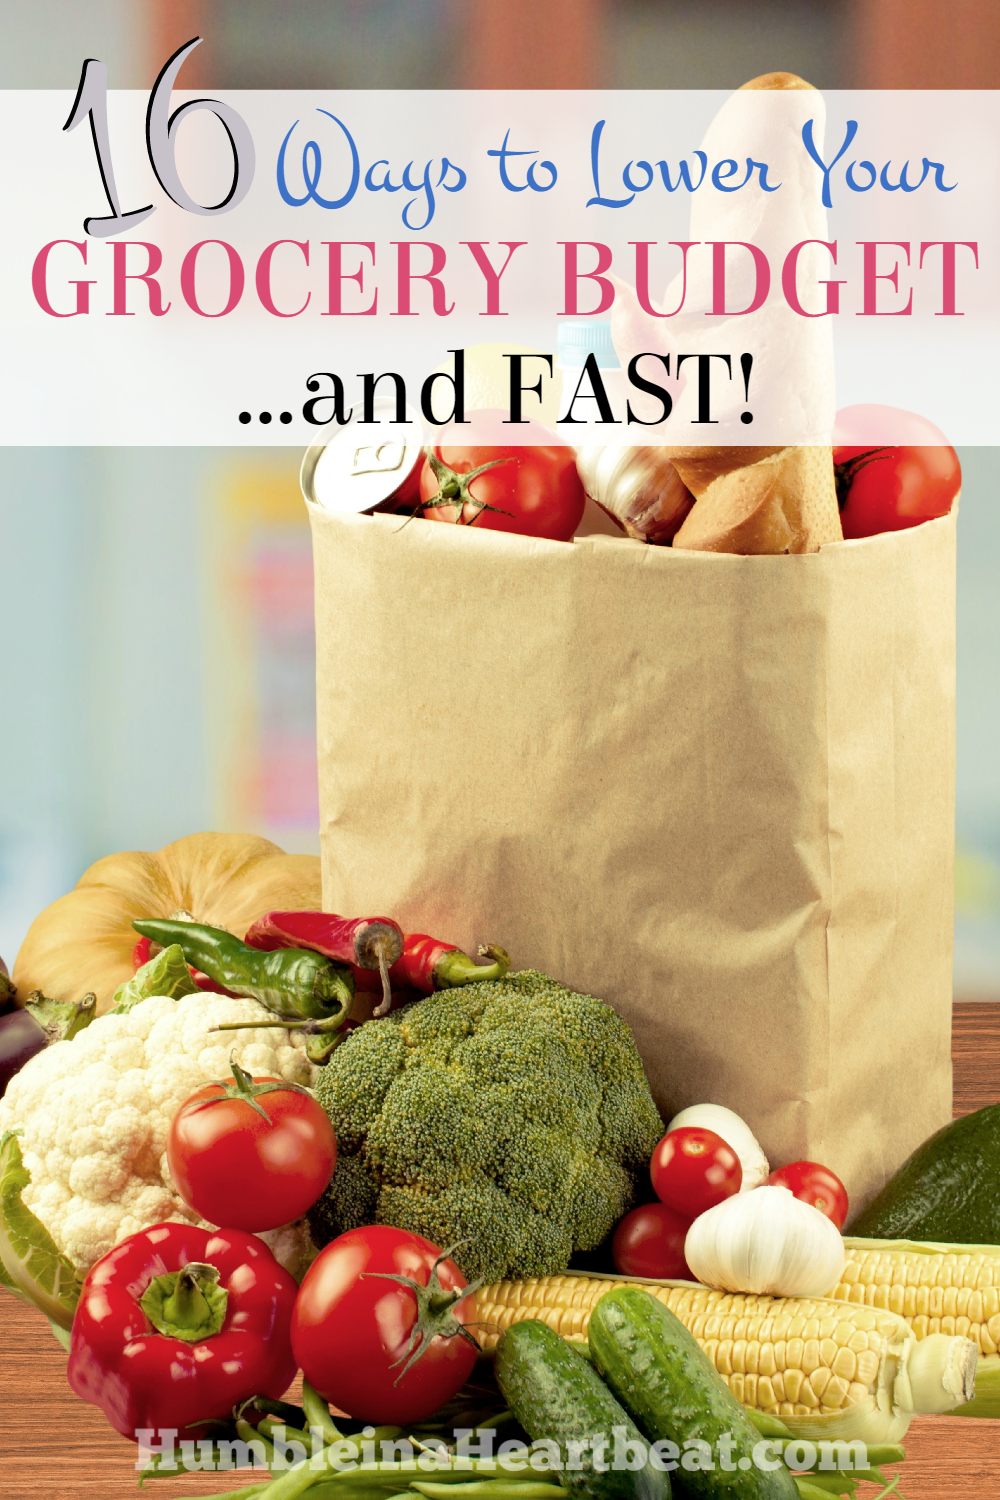 If you find yourself in a tight spot and need to lower the amount of money you spend on food, these 16 ways to save on groceries can help you out right now!